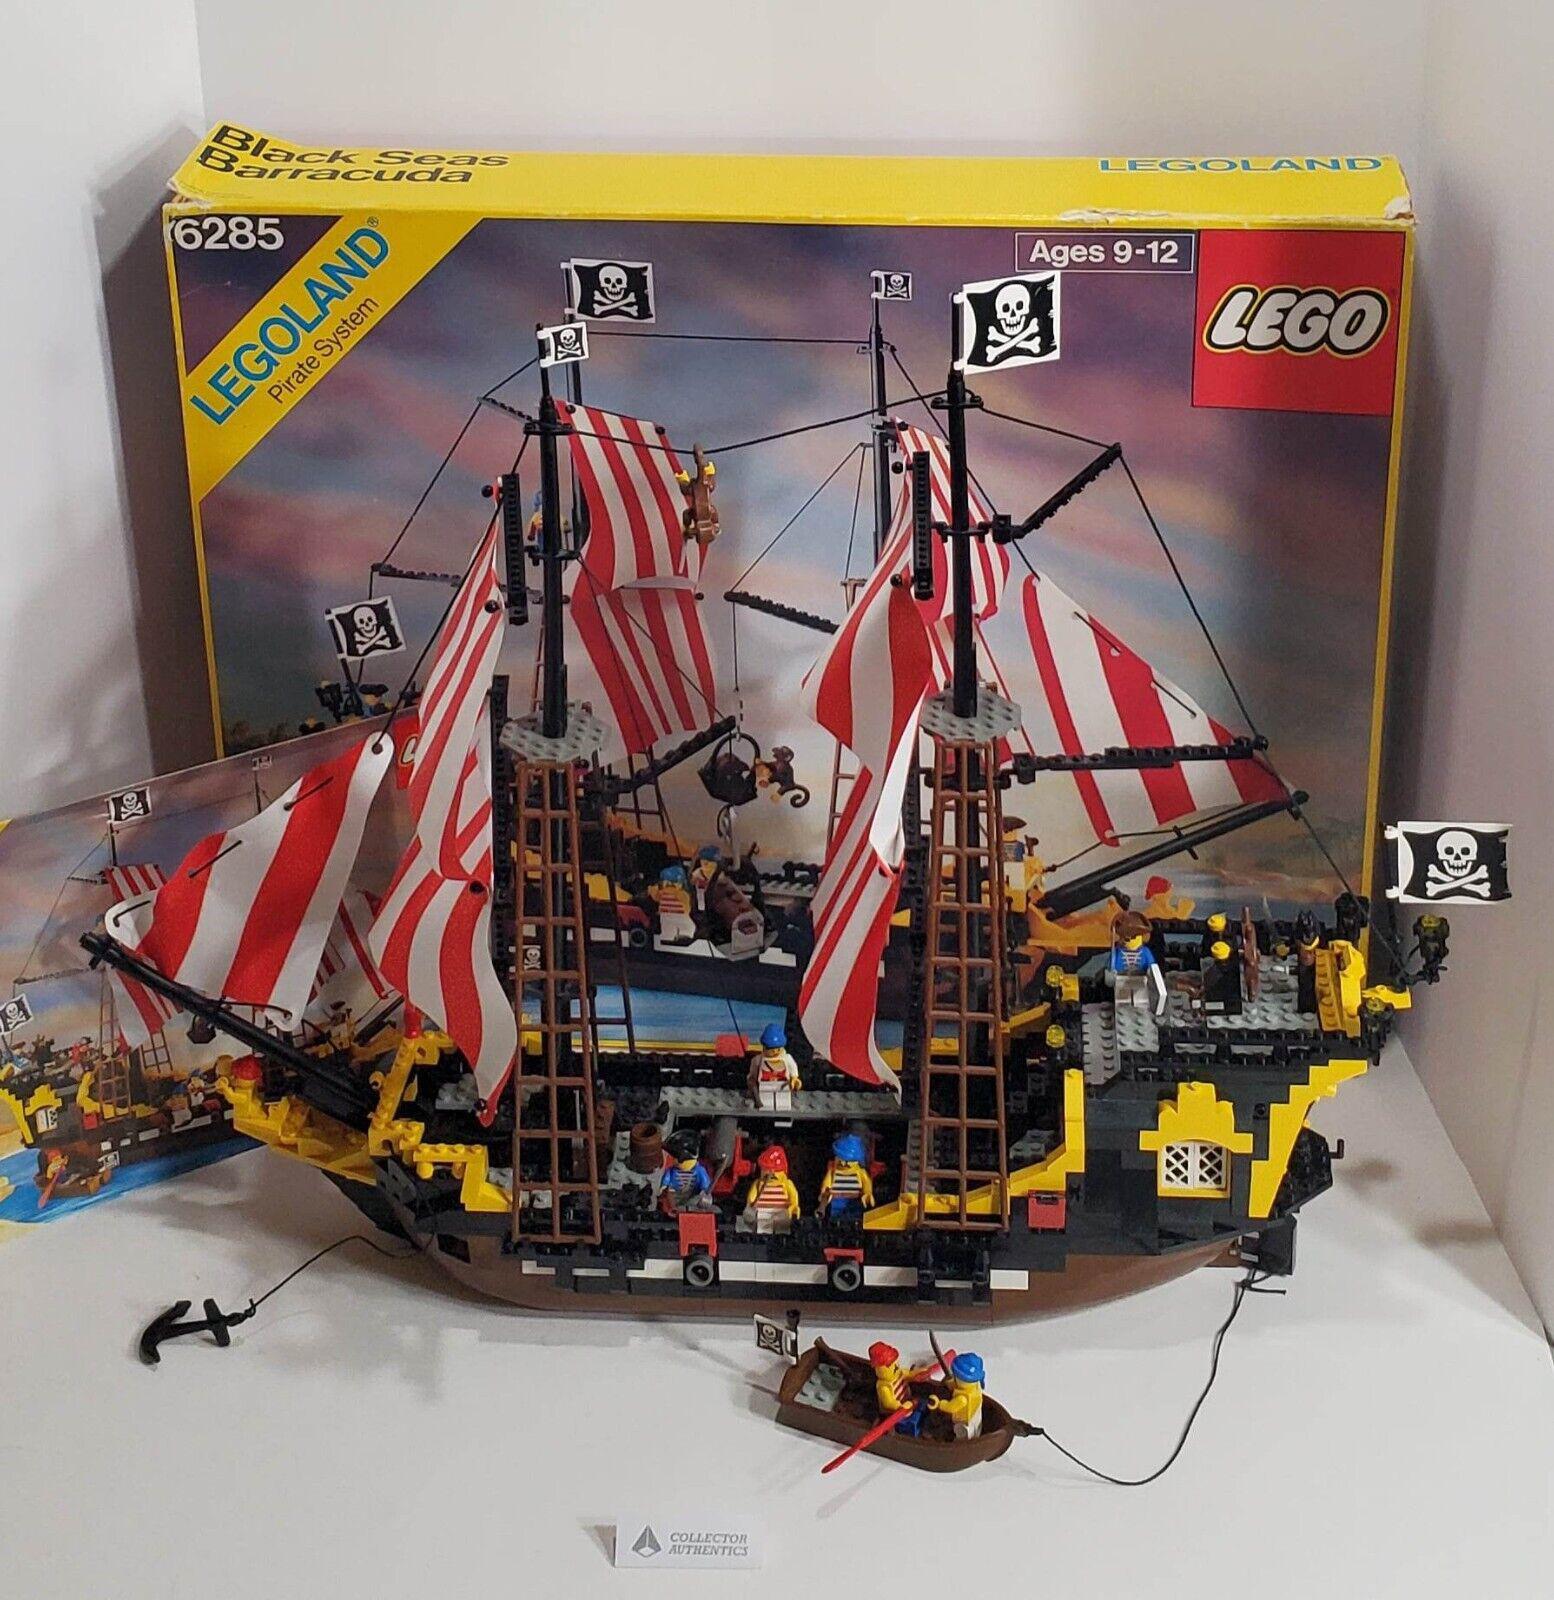 Most Valuable Lego Ships and Sets | Work + Money